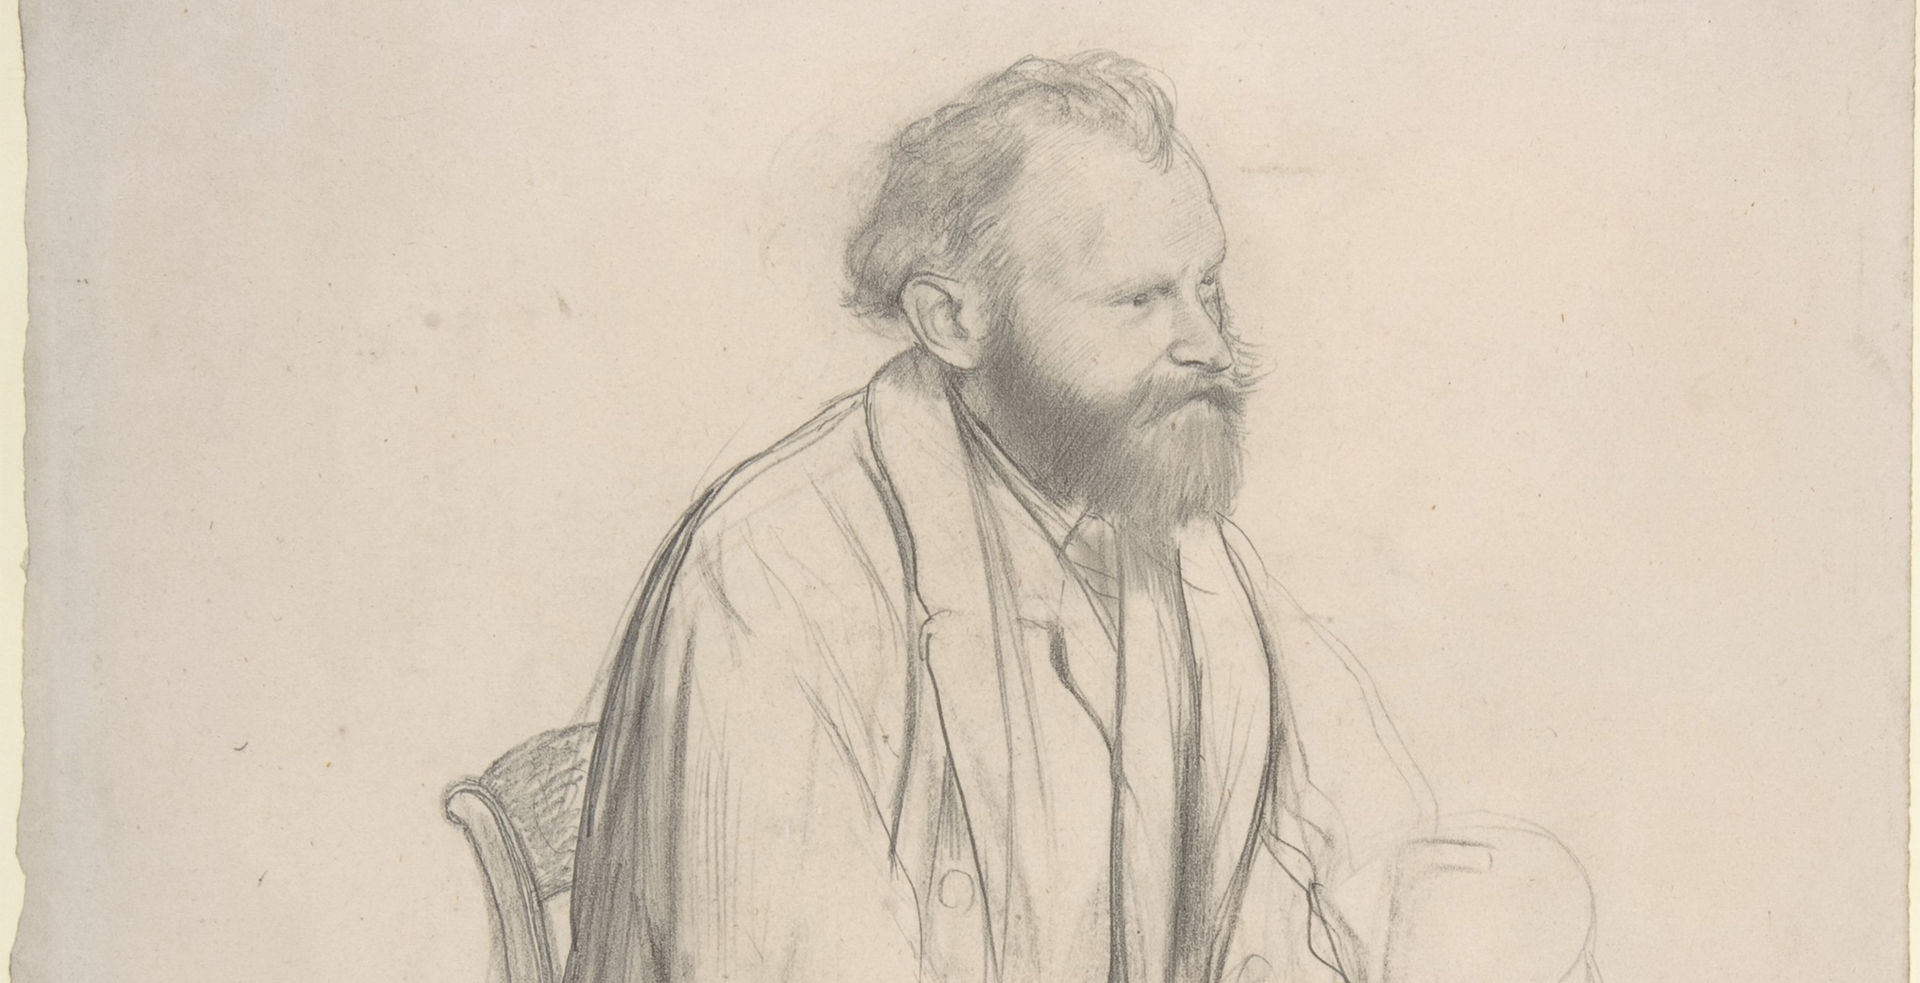 Sketch of man looking to the side against beige background